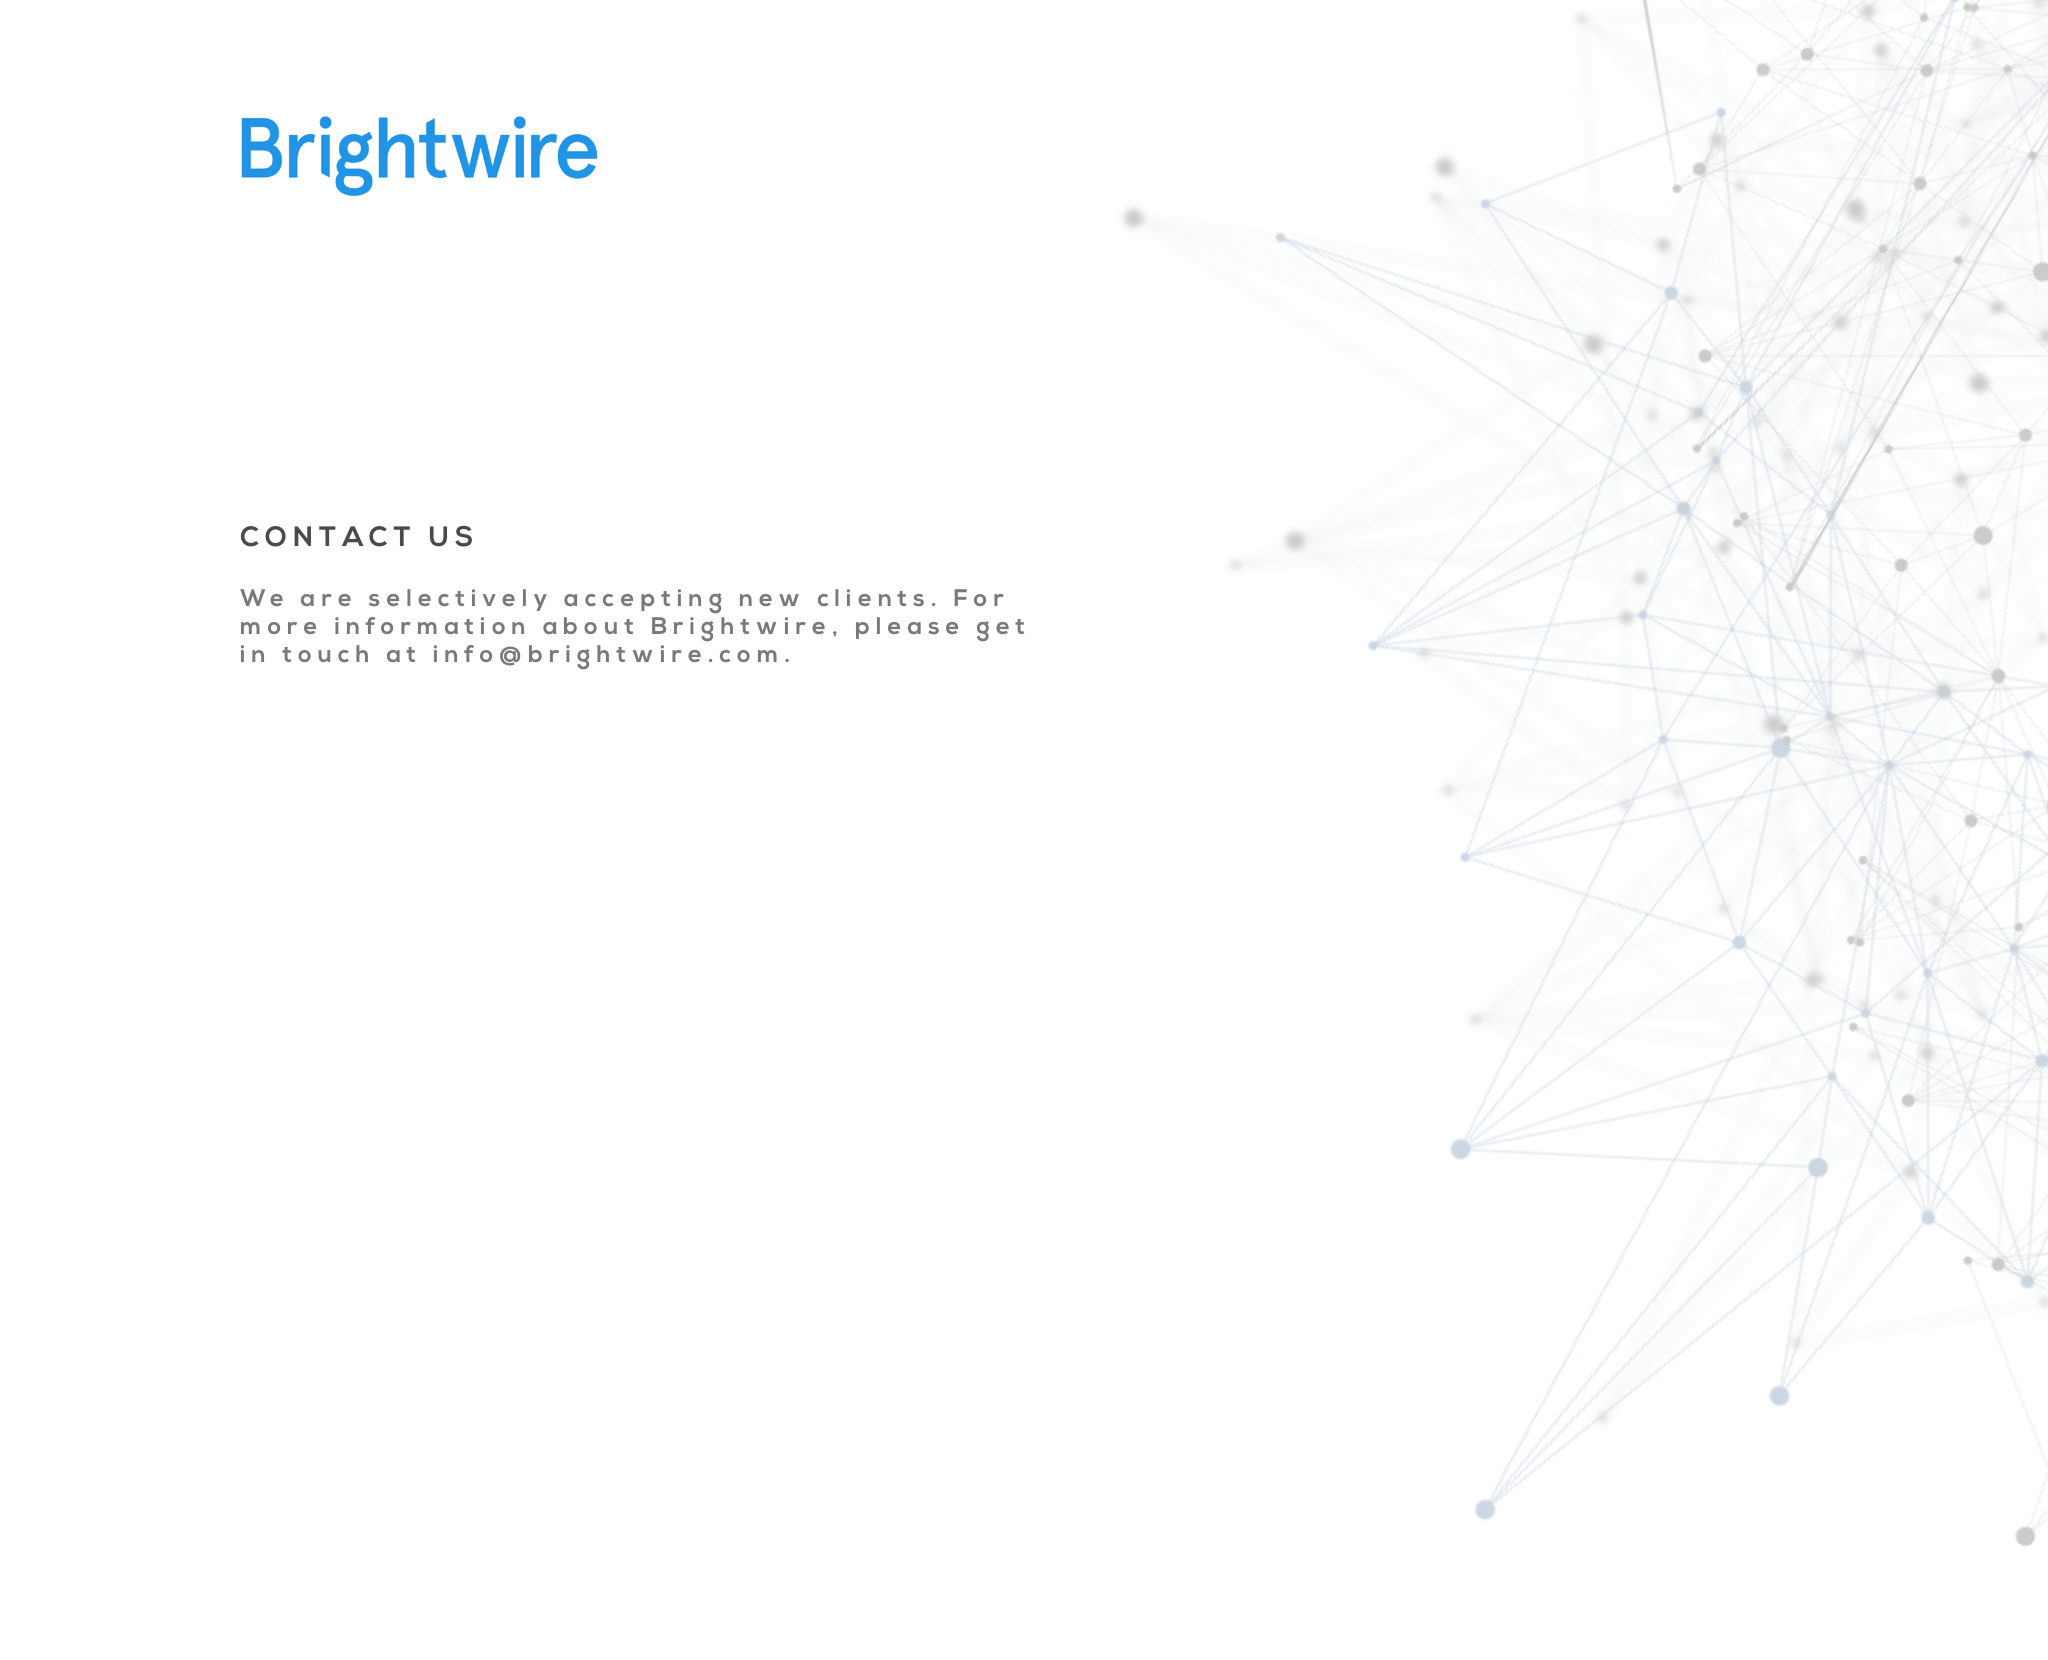 Brightwire: For more information please get in touch at info@brightwire.com